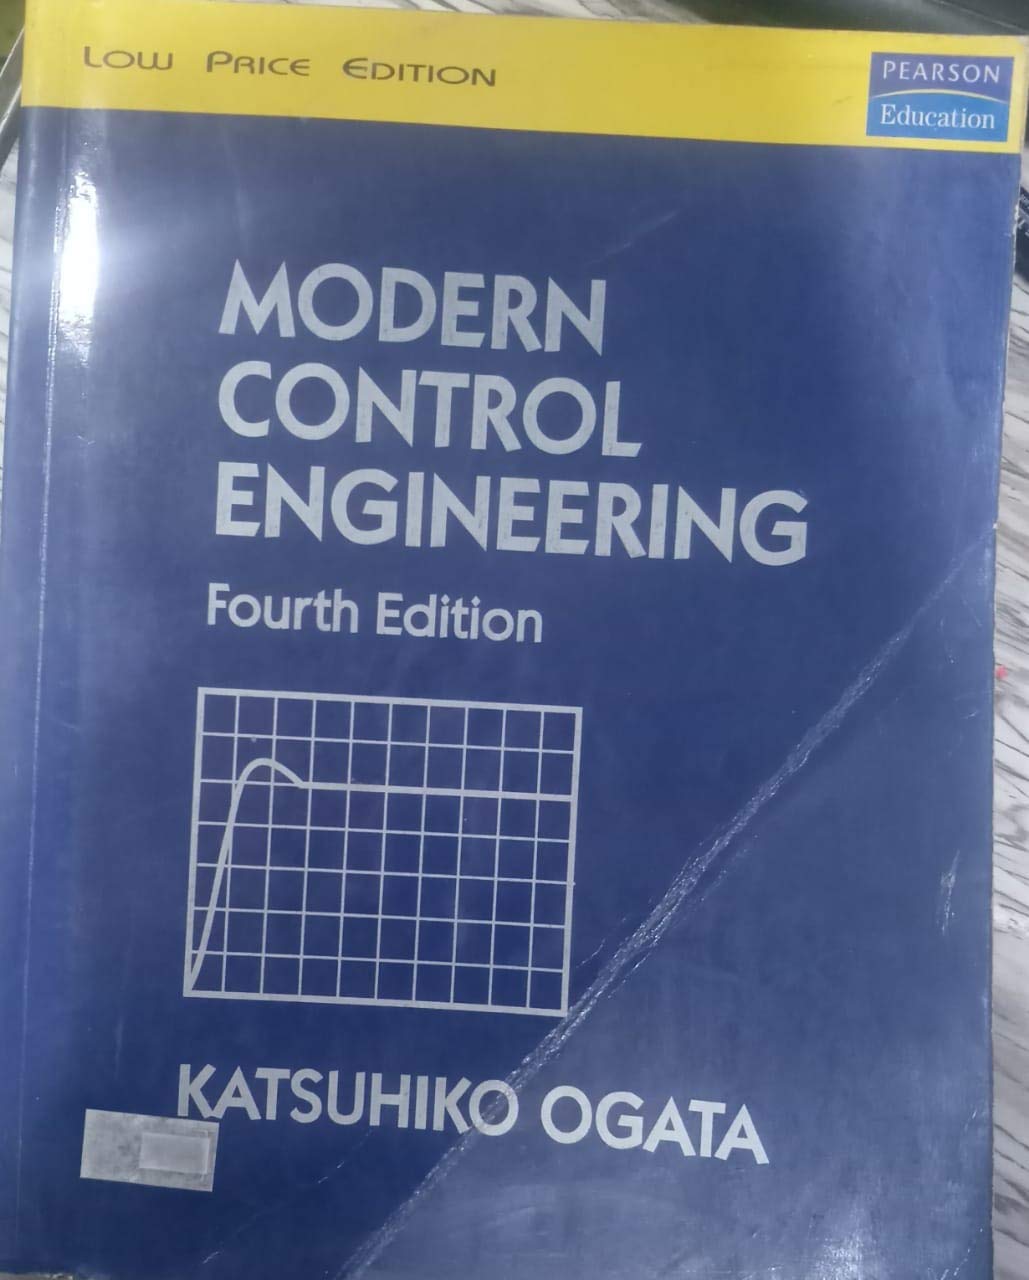 Modern control engineering 5th edition Book Free Download.